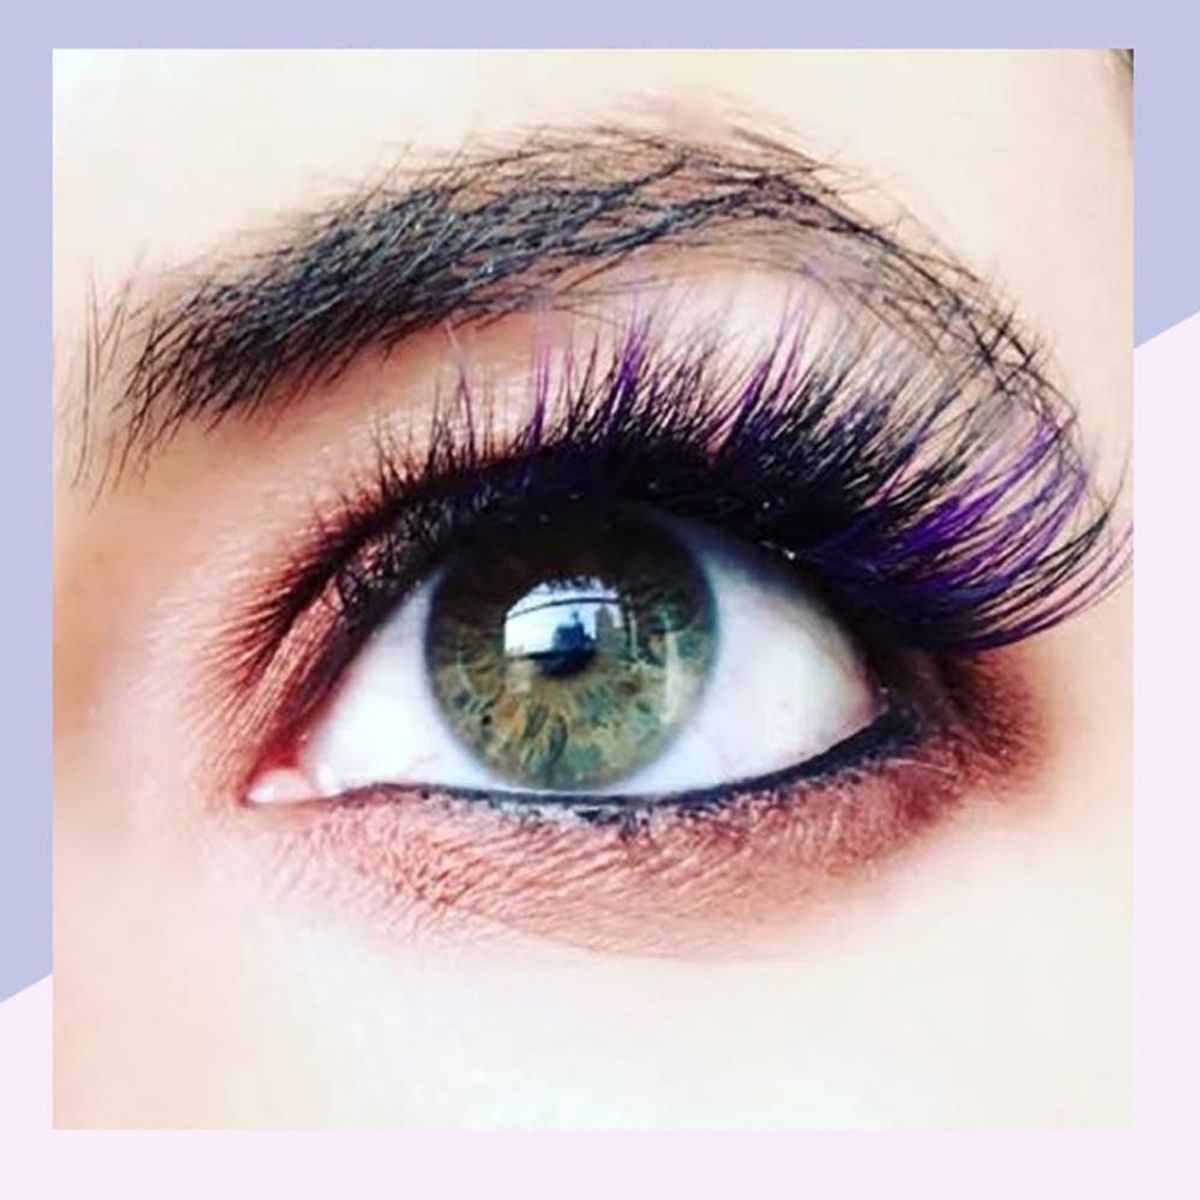 Mermaid Eyelash Extensions Are Here Just in Time for Halloween